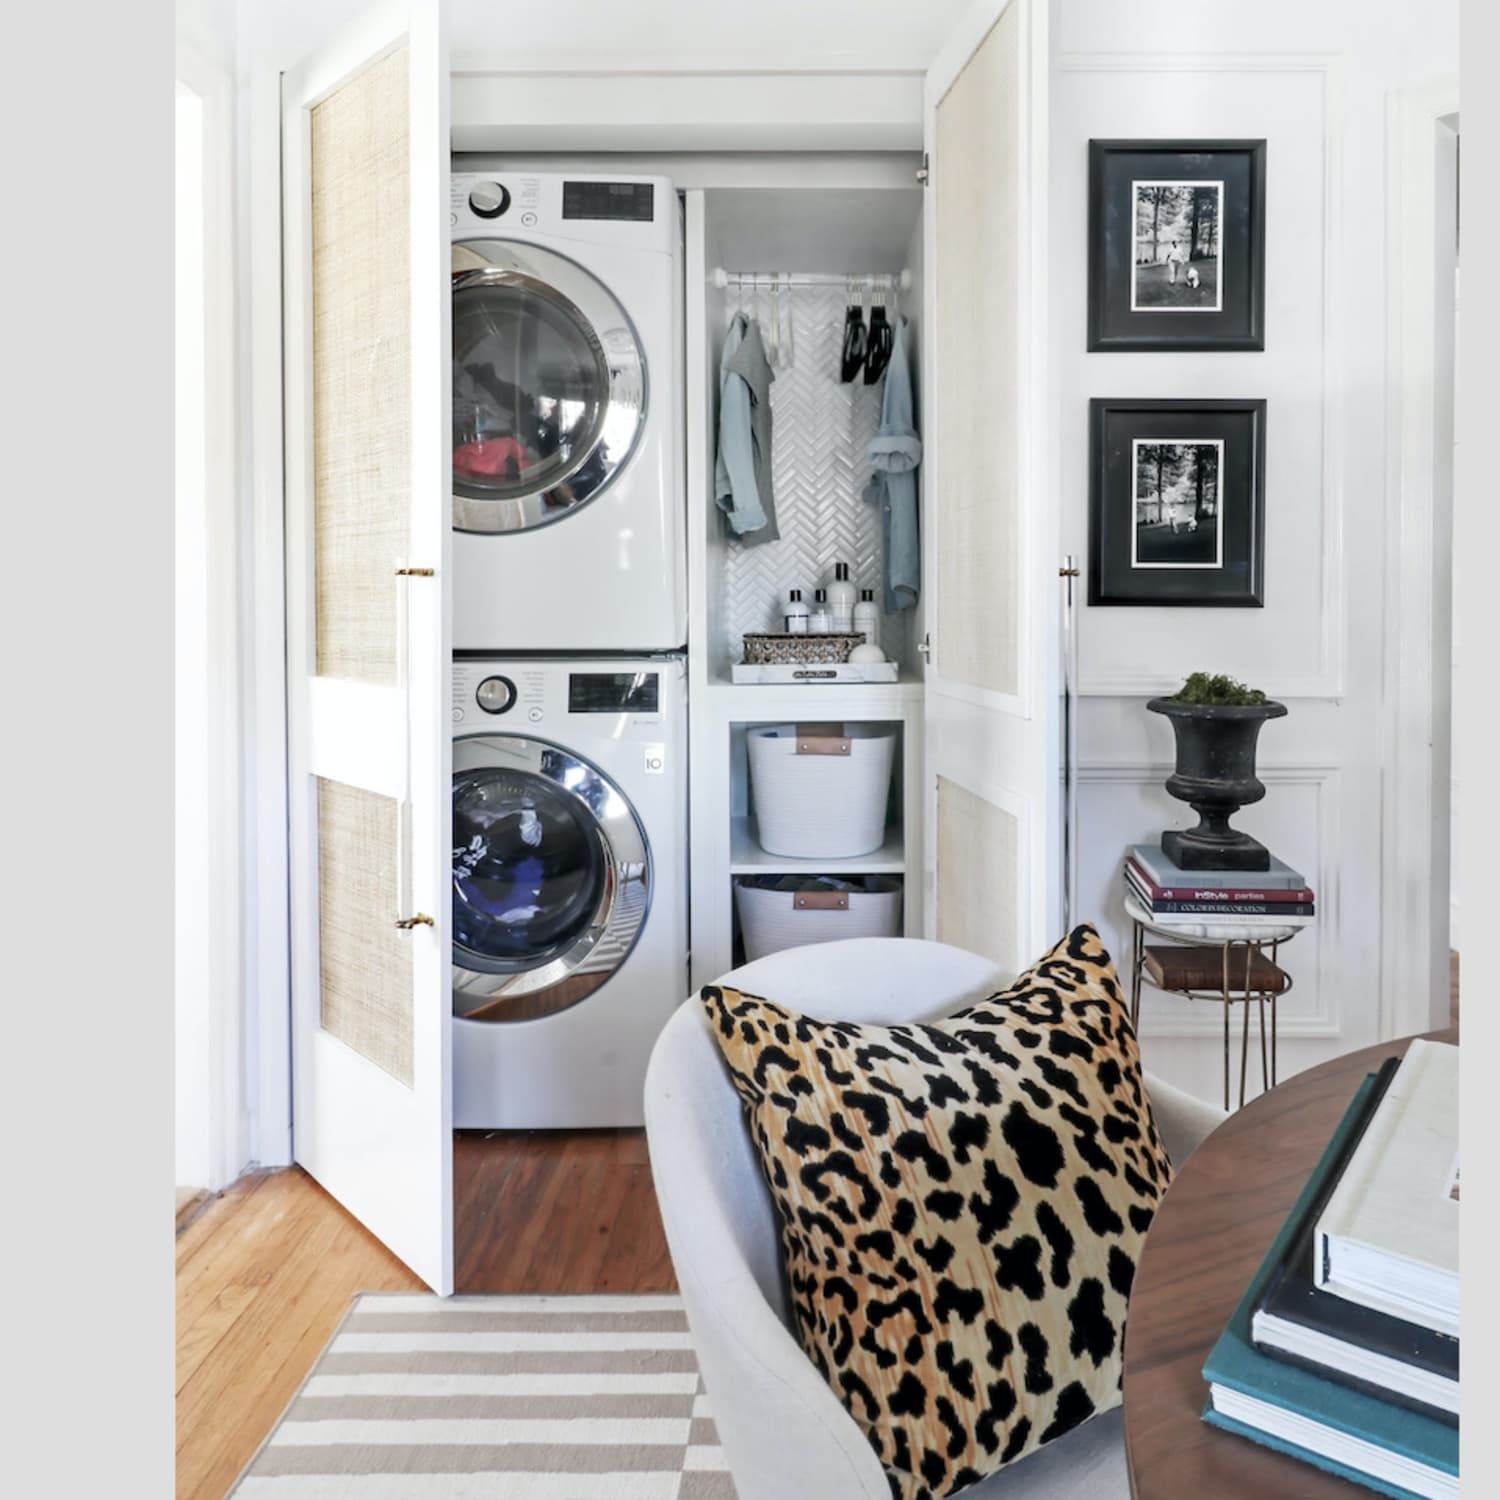 Chair with washer and dryer in closet in background